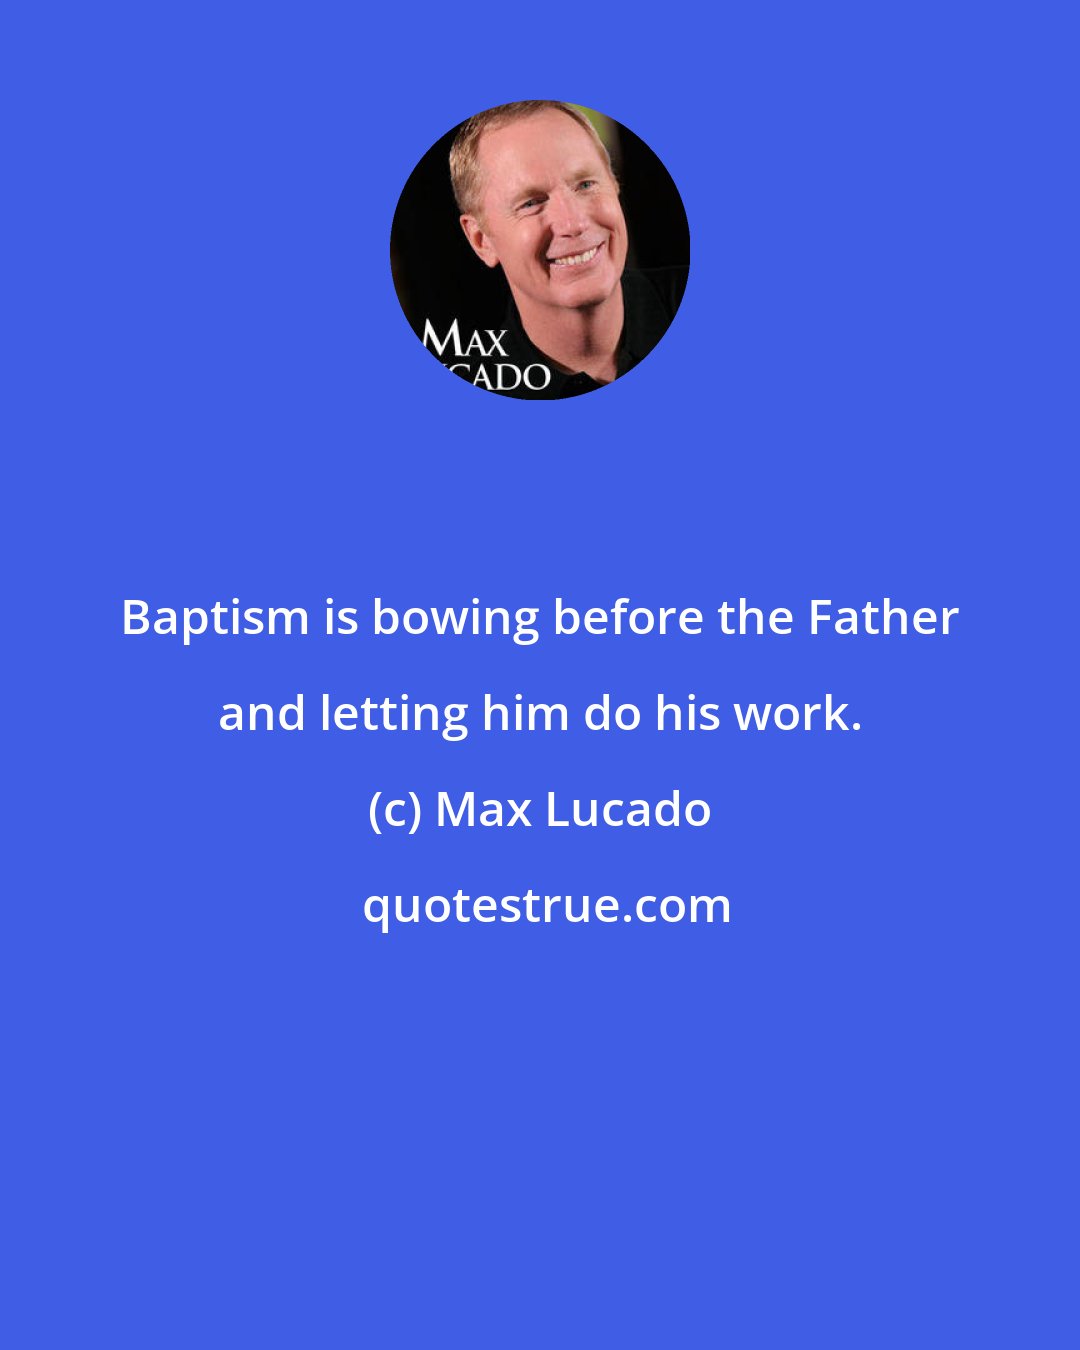 Max Lucado: Baptism is bowing before the Father and letting him do his work.